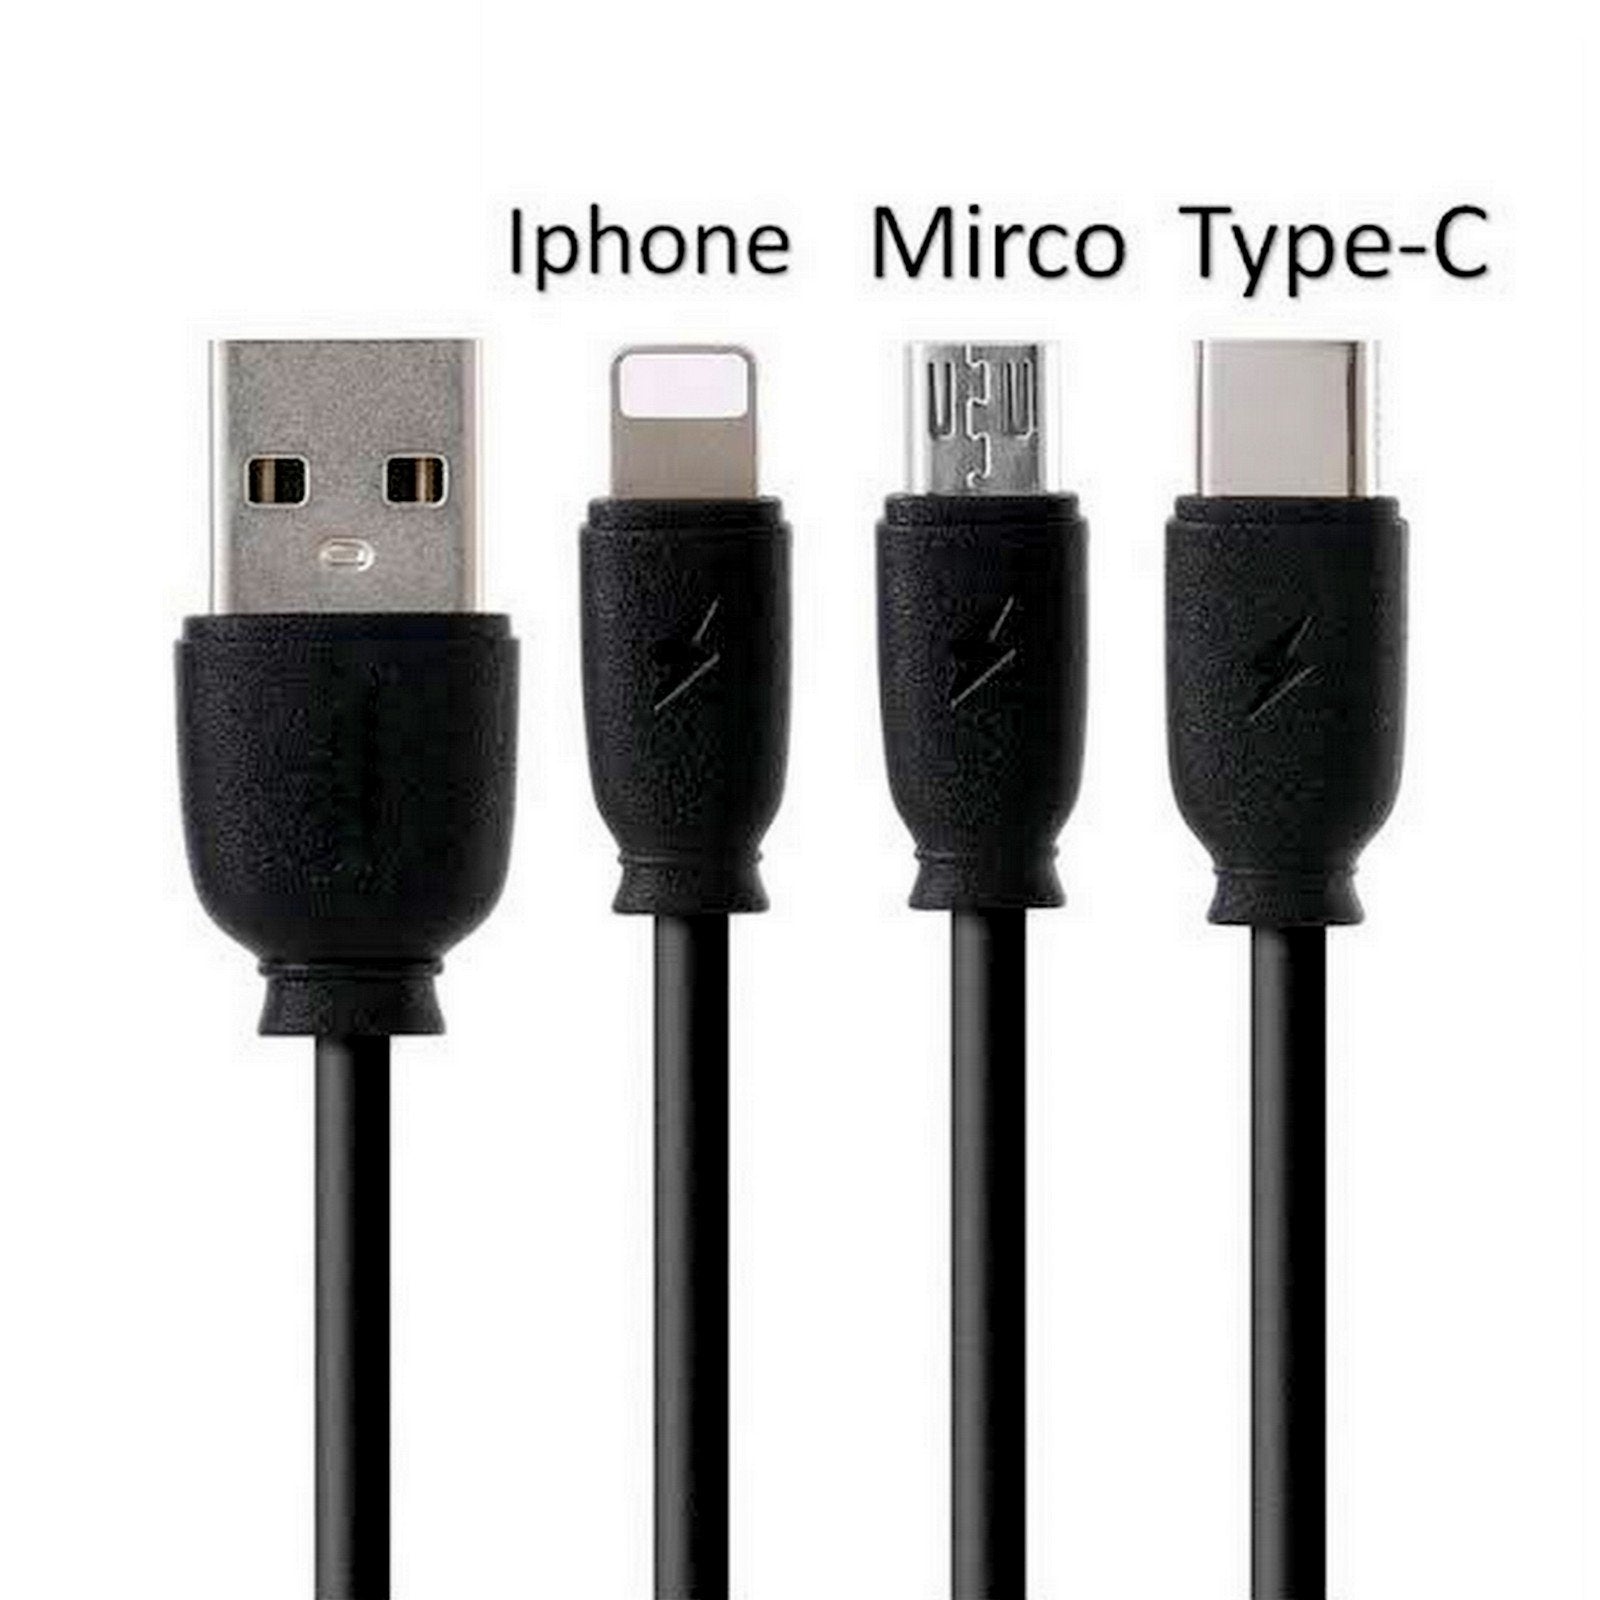 FAST CHARGING MOBILE DATA CABLE FOR I PHONE